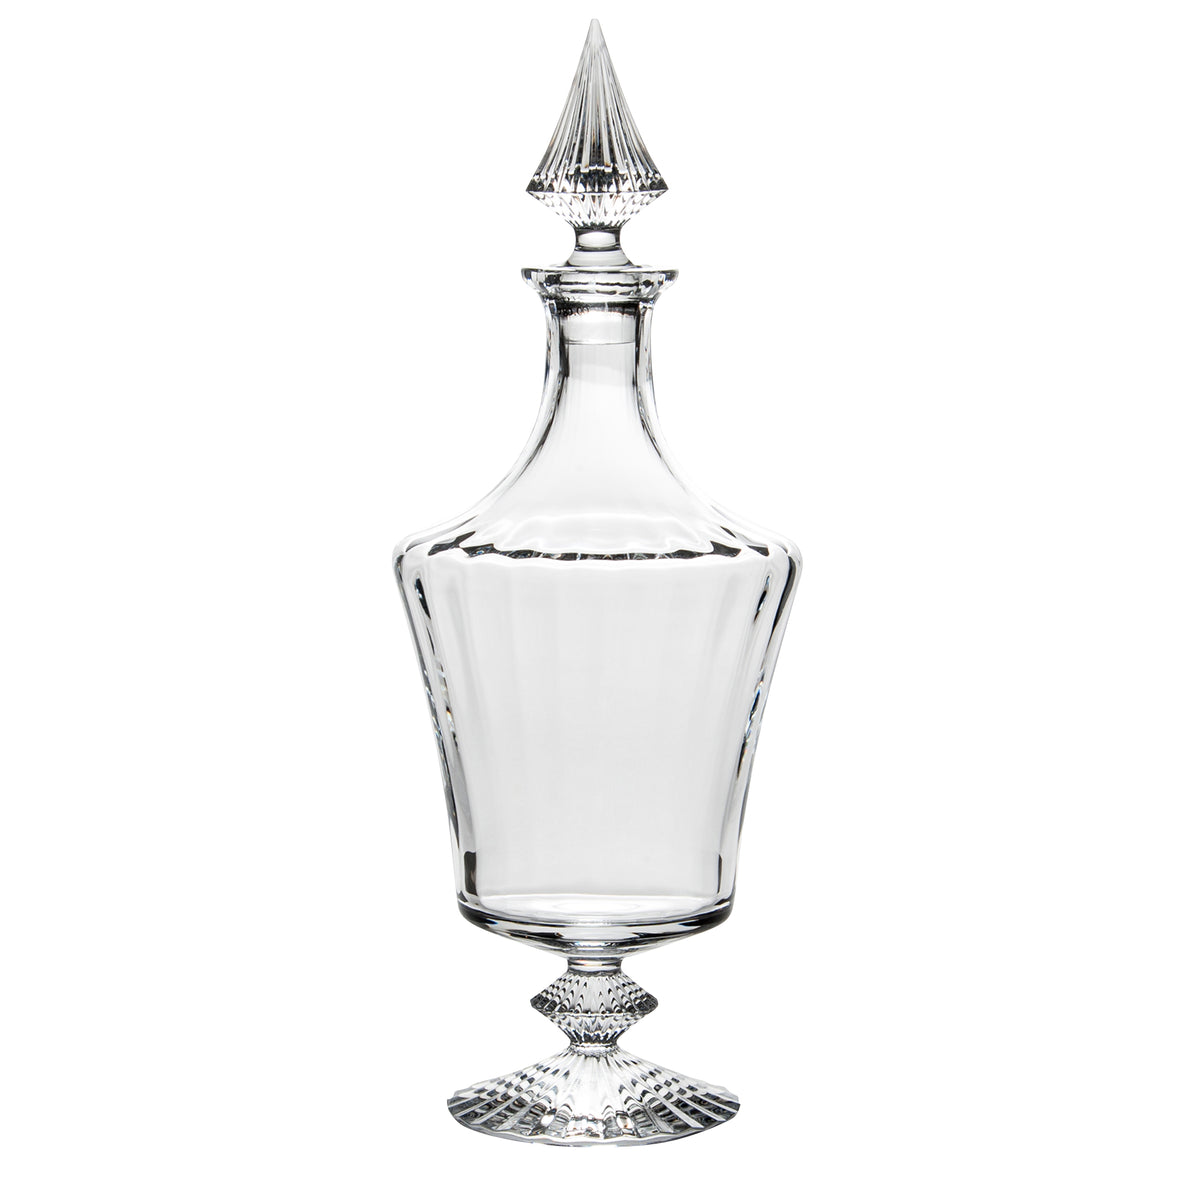 Mille Nuits Decanter